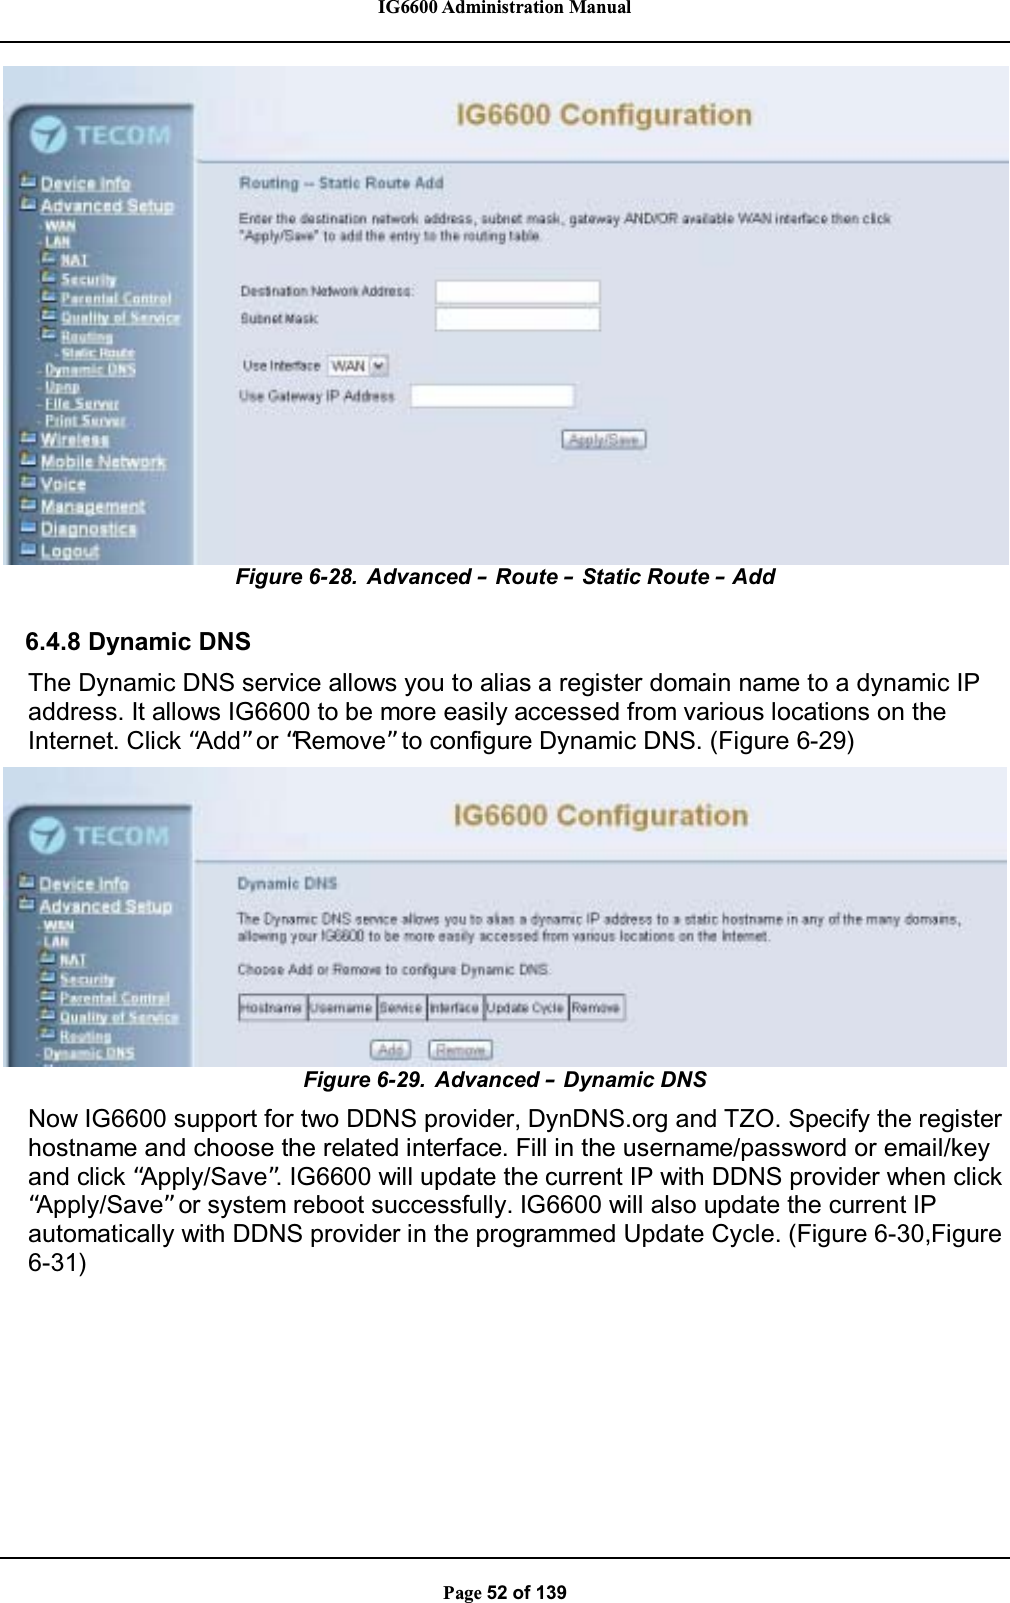 IG6600 Administration ManualPage 52 of 139Figure 6-28. Advanced –Route –Static Route –Add6.4.8 Dynamic DNSThe Dynamic DNS service allows you to alias a register domain name to a dynamic IPaddress. It allows IG6600 to be more easily accessed from various locations on theInternet. Click “Add”or “Remove” to configure Dynamic DNS. (Figure 6-29)Figure 6-29. Advanced –Dynamic DNSNow IG6600 support for two DDNS provider, DynDNS.org and TZO. Specify the registerhostname and choose the related interface. Fill in the username/password or email/keyand click “Apply/Save”. IG6600 will update the current IP with DDNS provider when click“Apply/Save”or system reboot successfully. IG6600 will also update the current IPautomatically with DDNS provider in the programmed Update Cycle. (Figure 6-30,Figure6-31)